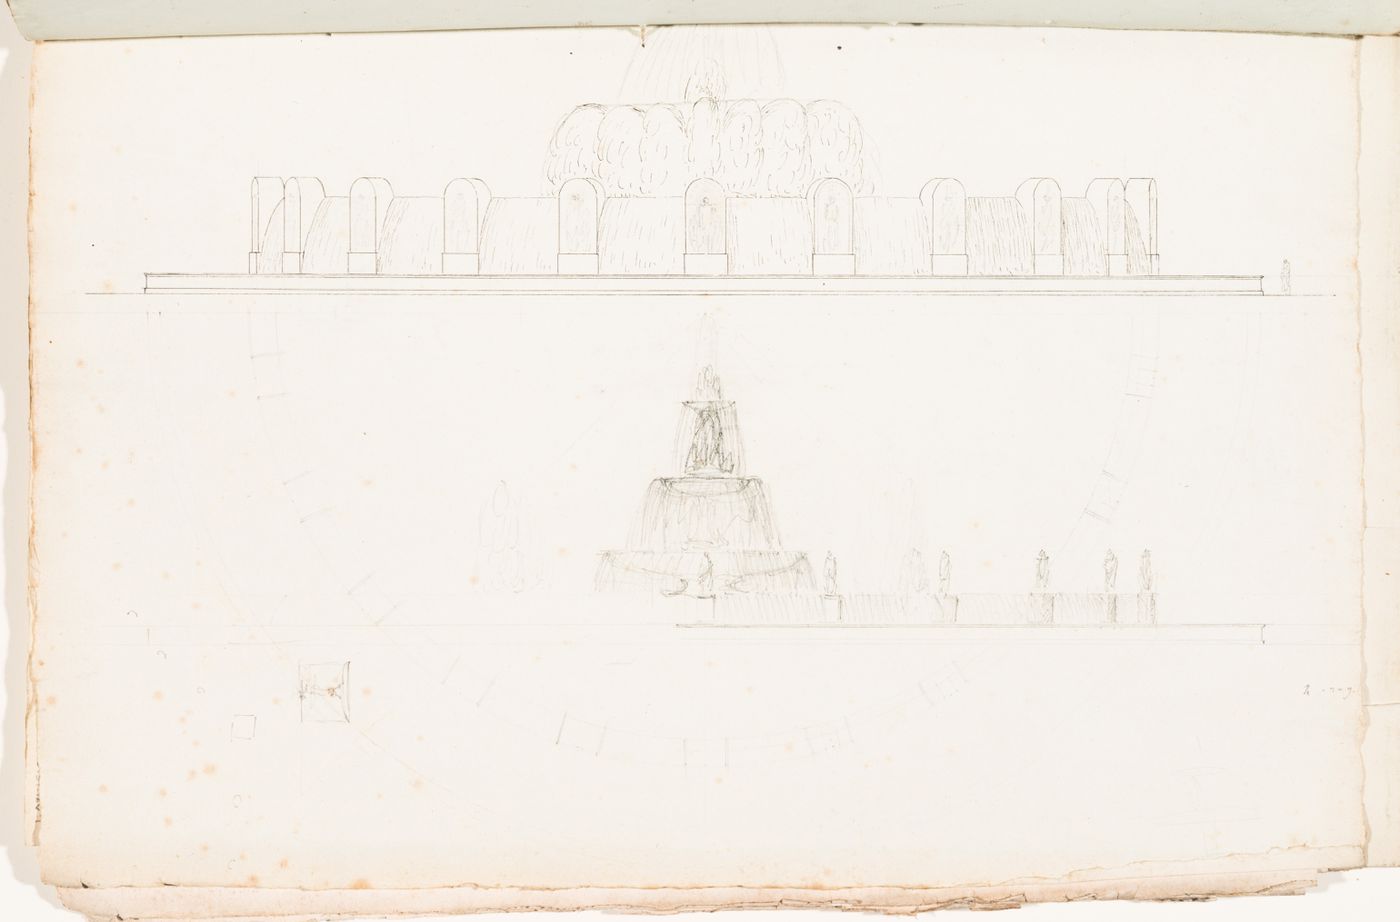 Two conceptual elevations and a half plan for a fountain; verso: Conceptual sketches, including plans, elevations and details for a colonnade and an urban square, probably place Louis XV